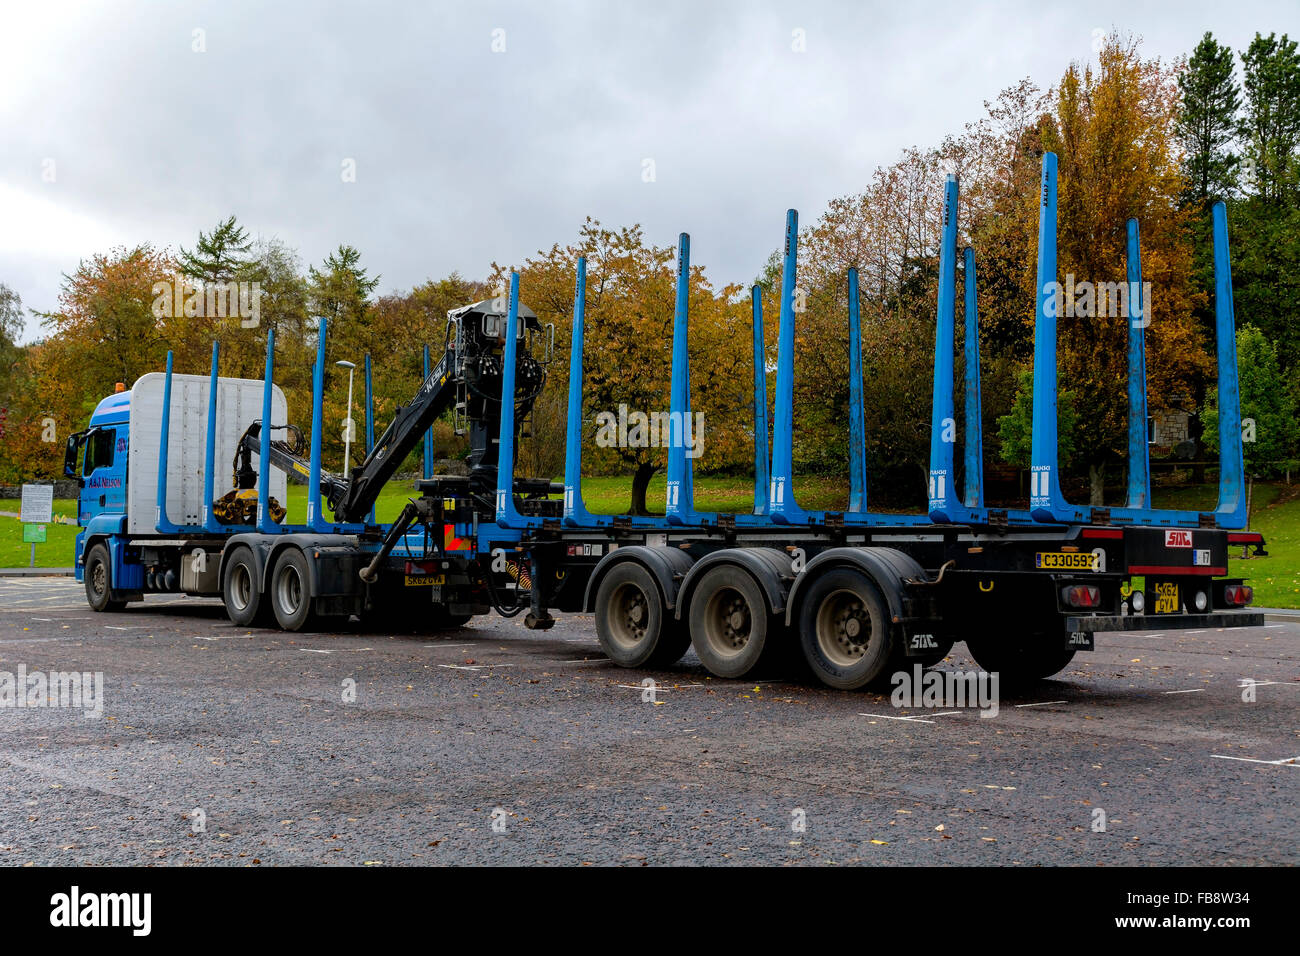 A specialist trailer for carrying huge logs and tree trunks. The lorry has it's own hiab for lifting logs onto the trailer. Stock Photo